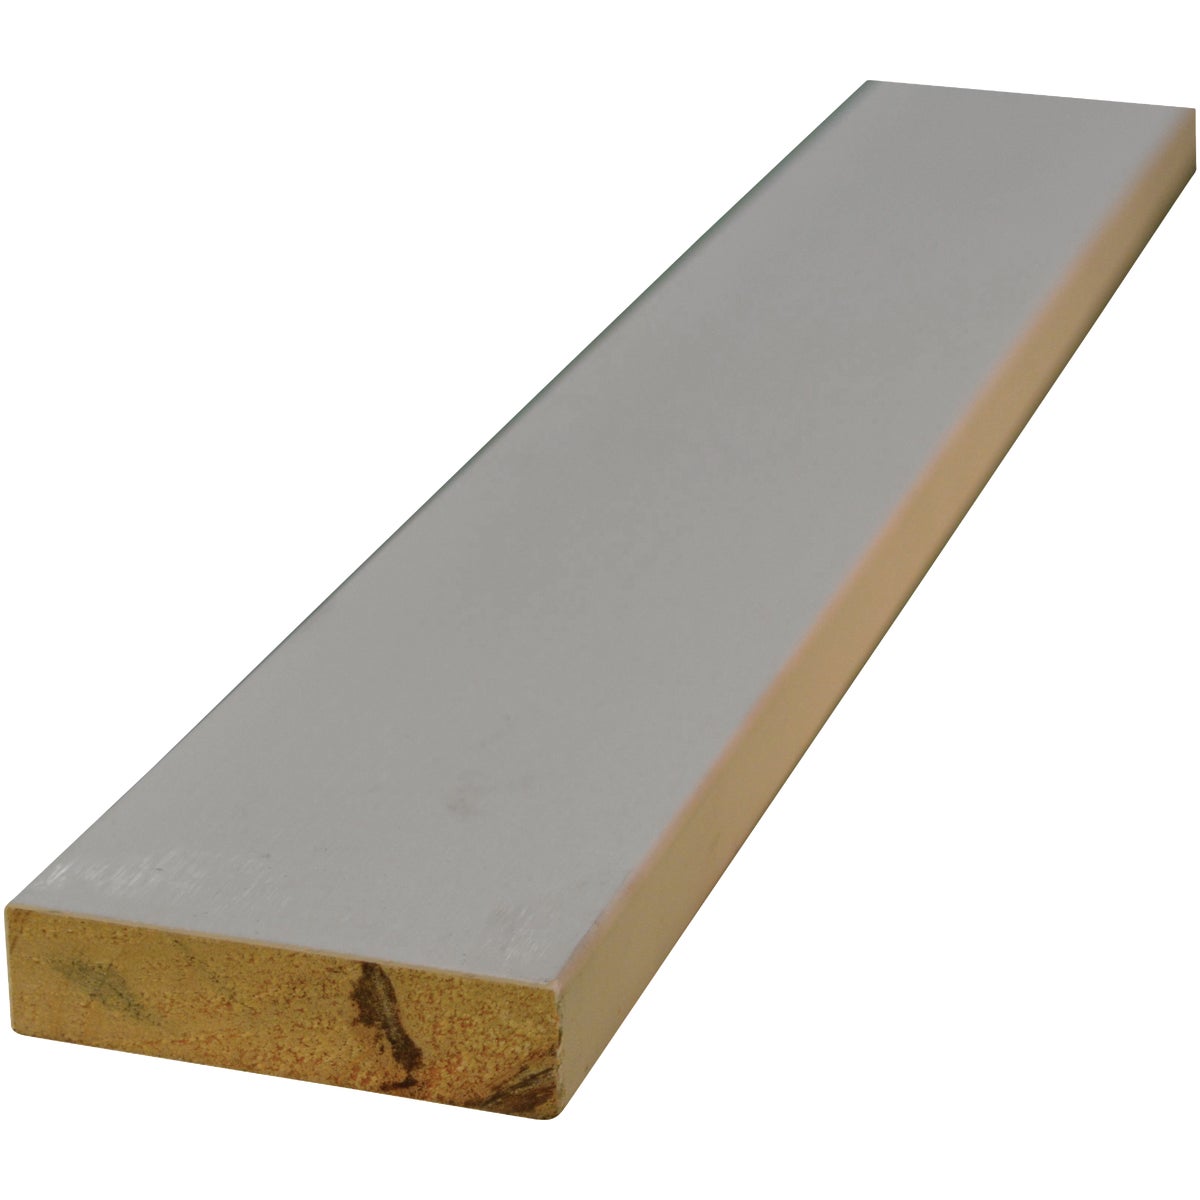 Alexandria Moulding 1 In. W. x 3 In. H. x 8 Ft. L. White Finger Joint Pine Board